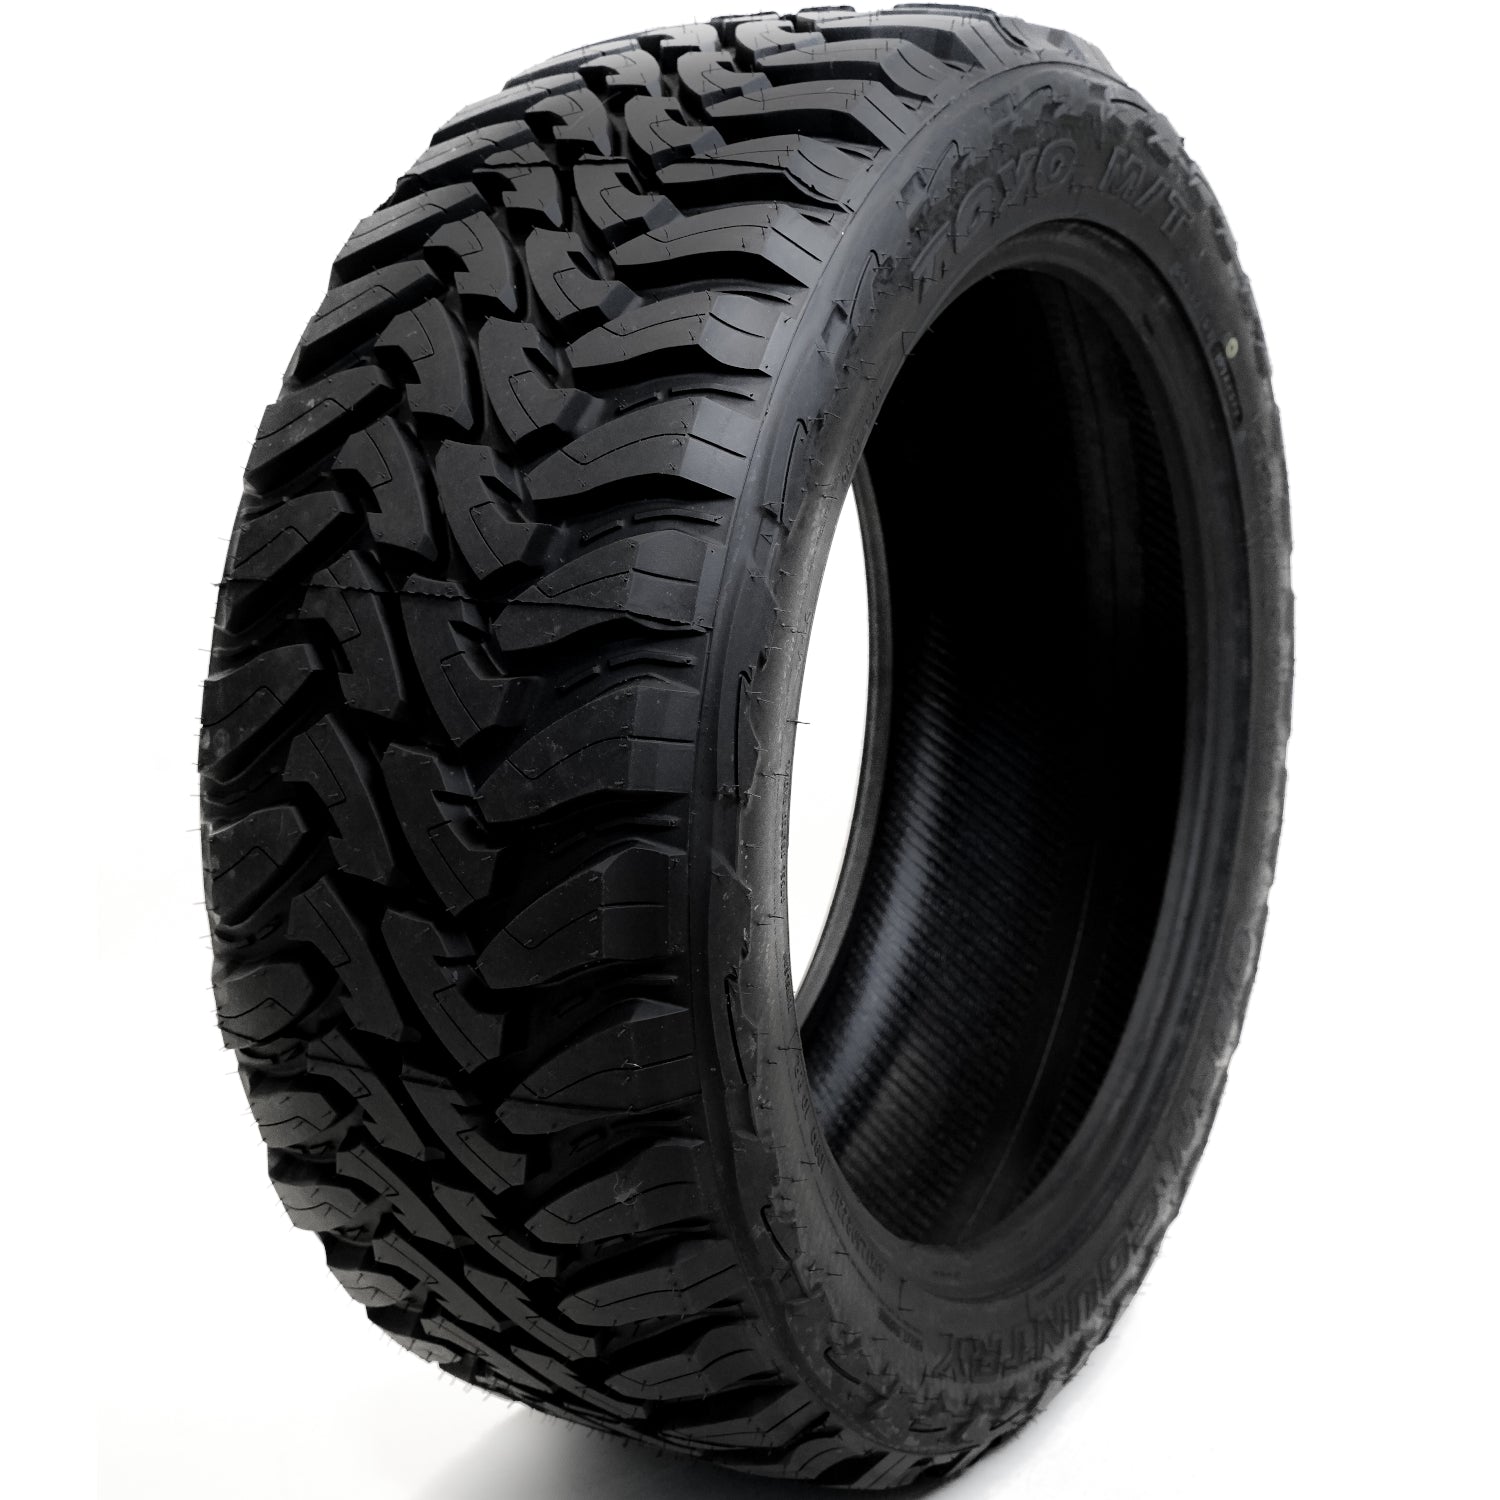 TOYO TIRES OPEN COUNTRY M/T 33X12.50R18LT Tires